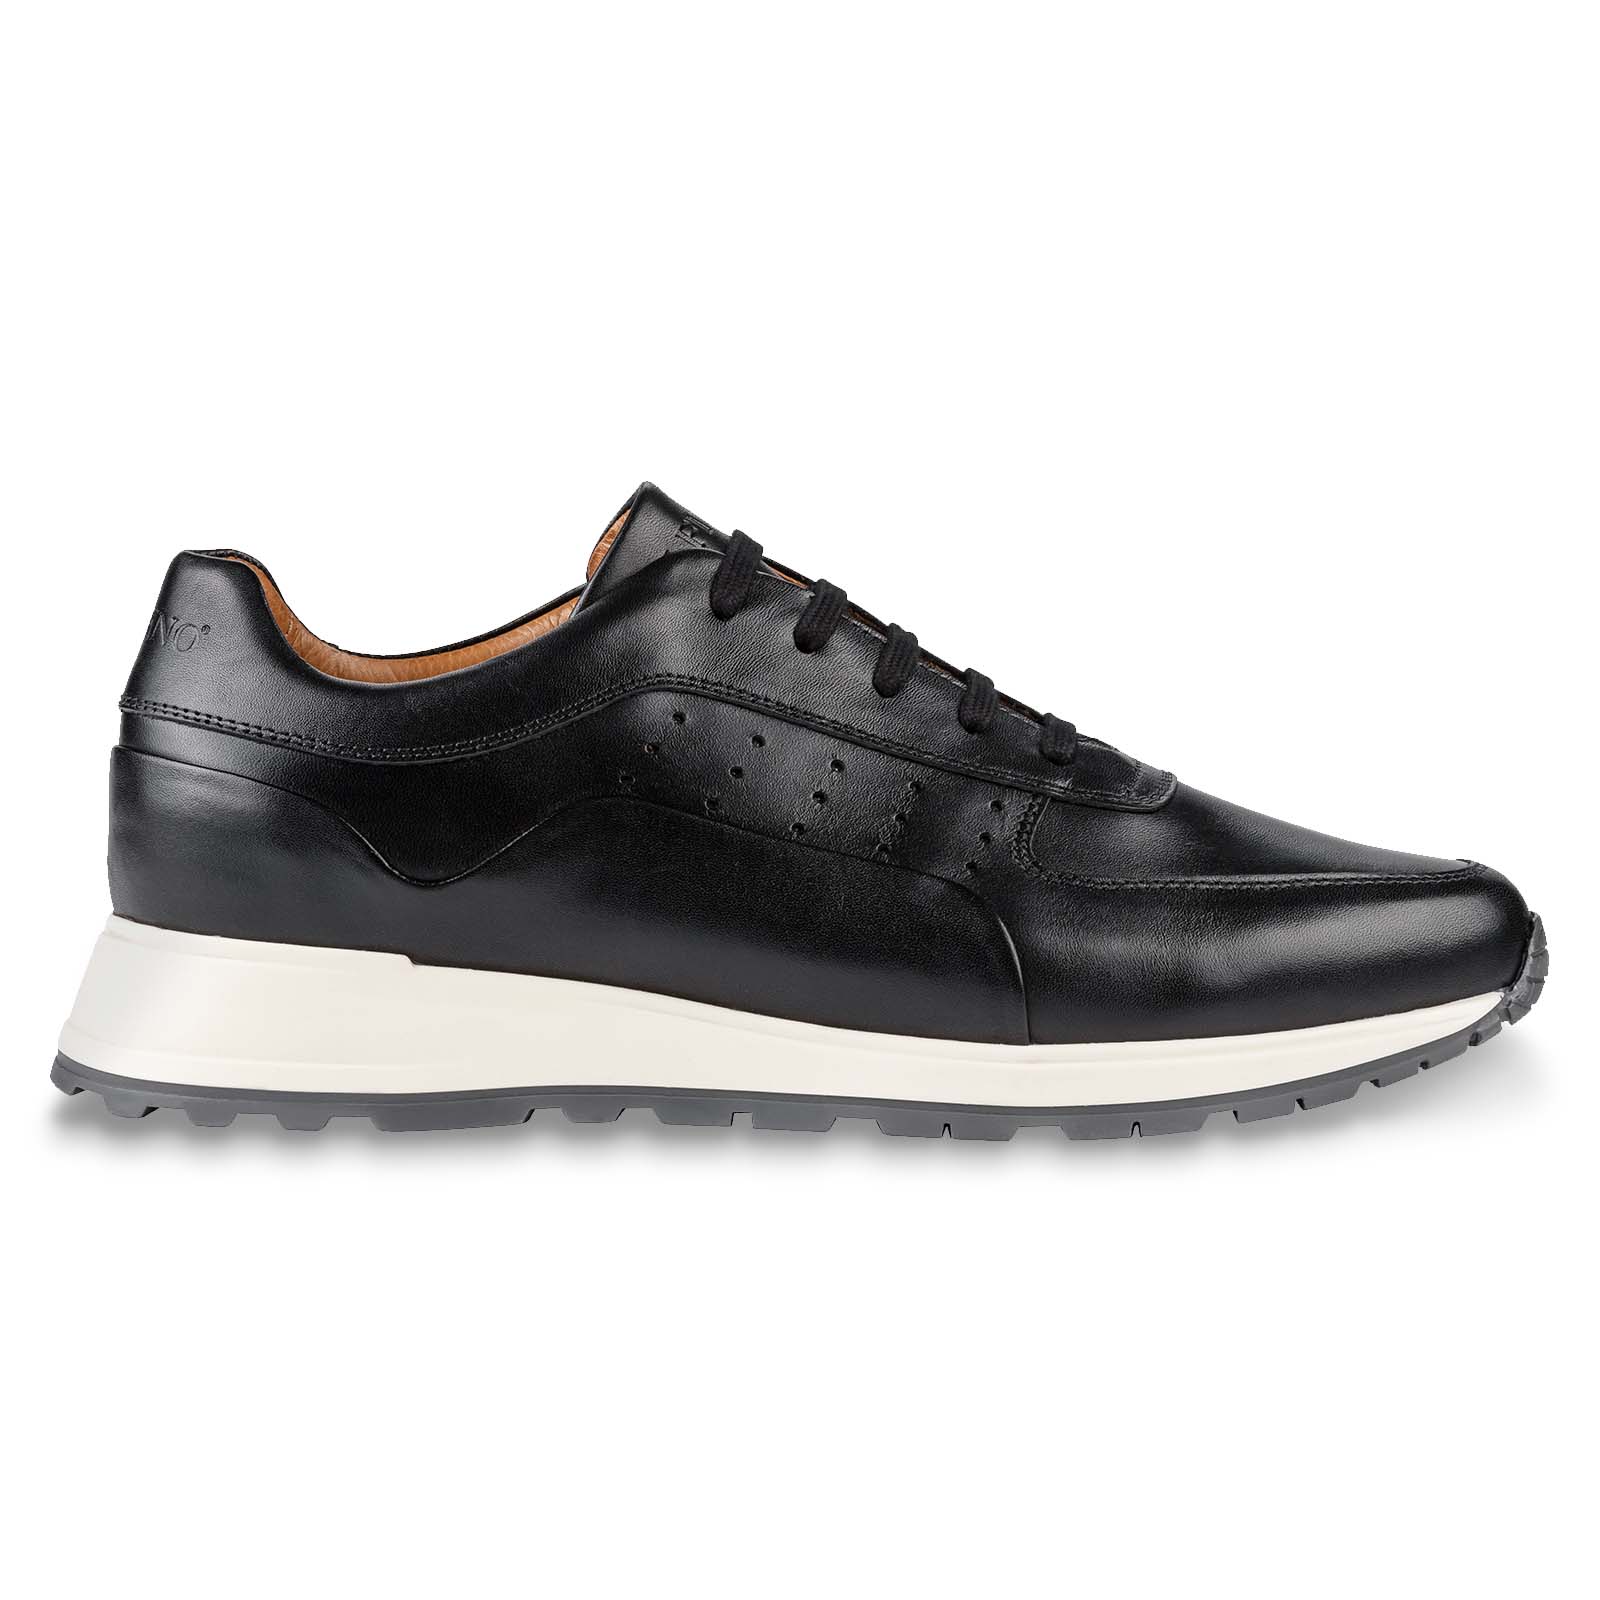 Men's shoes with a sporty touch 